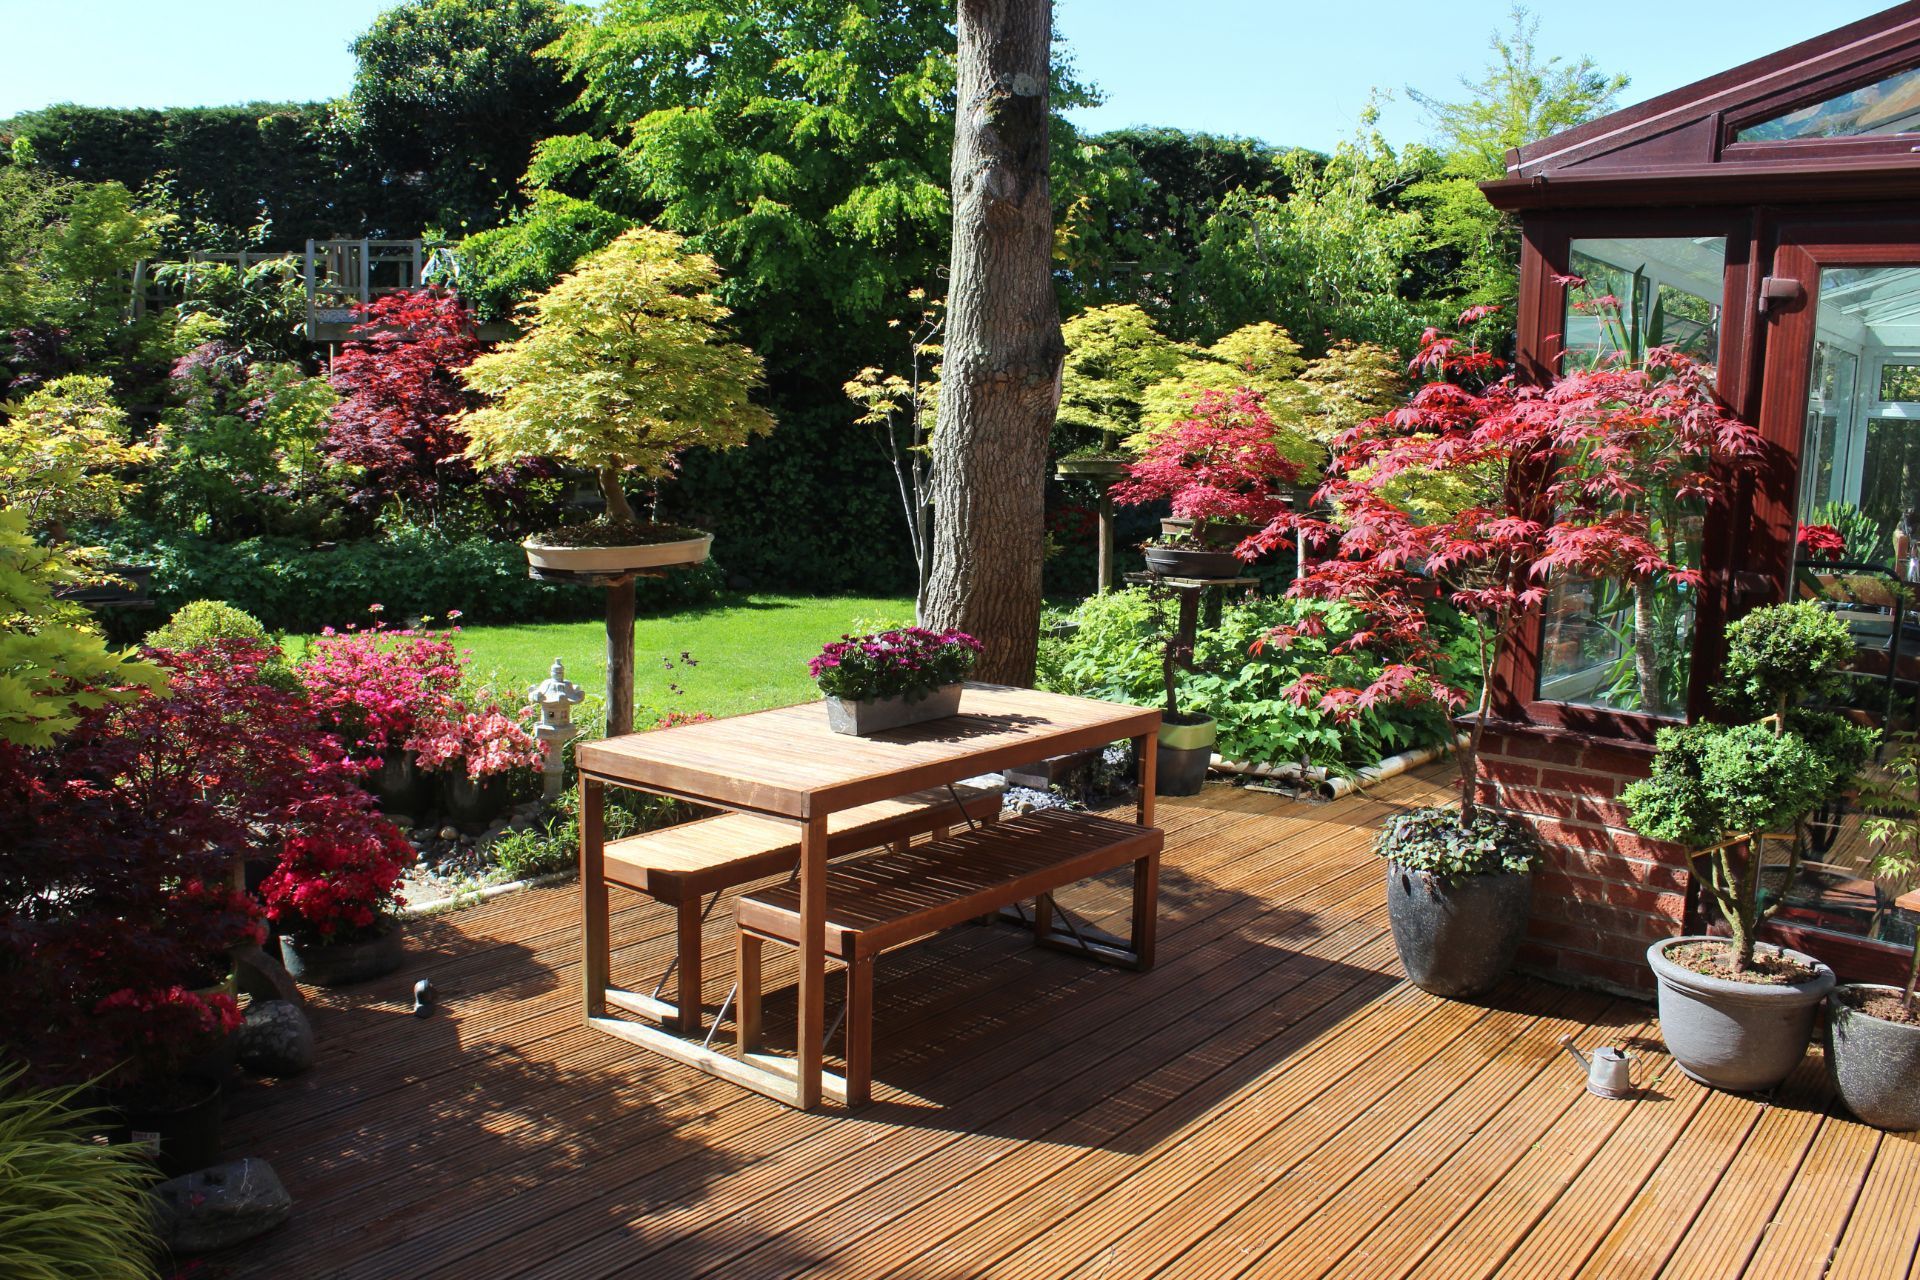 Wooden deck with furniture, vibrant garden, and conservatory.